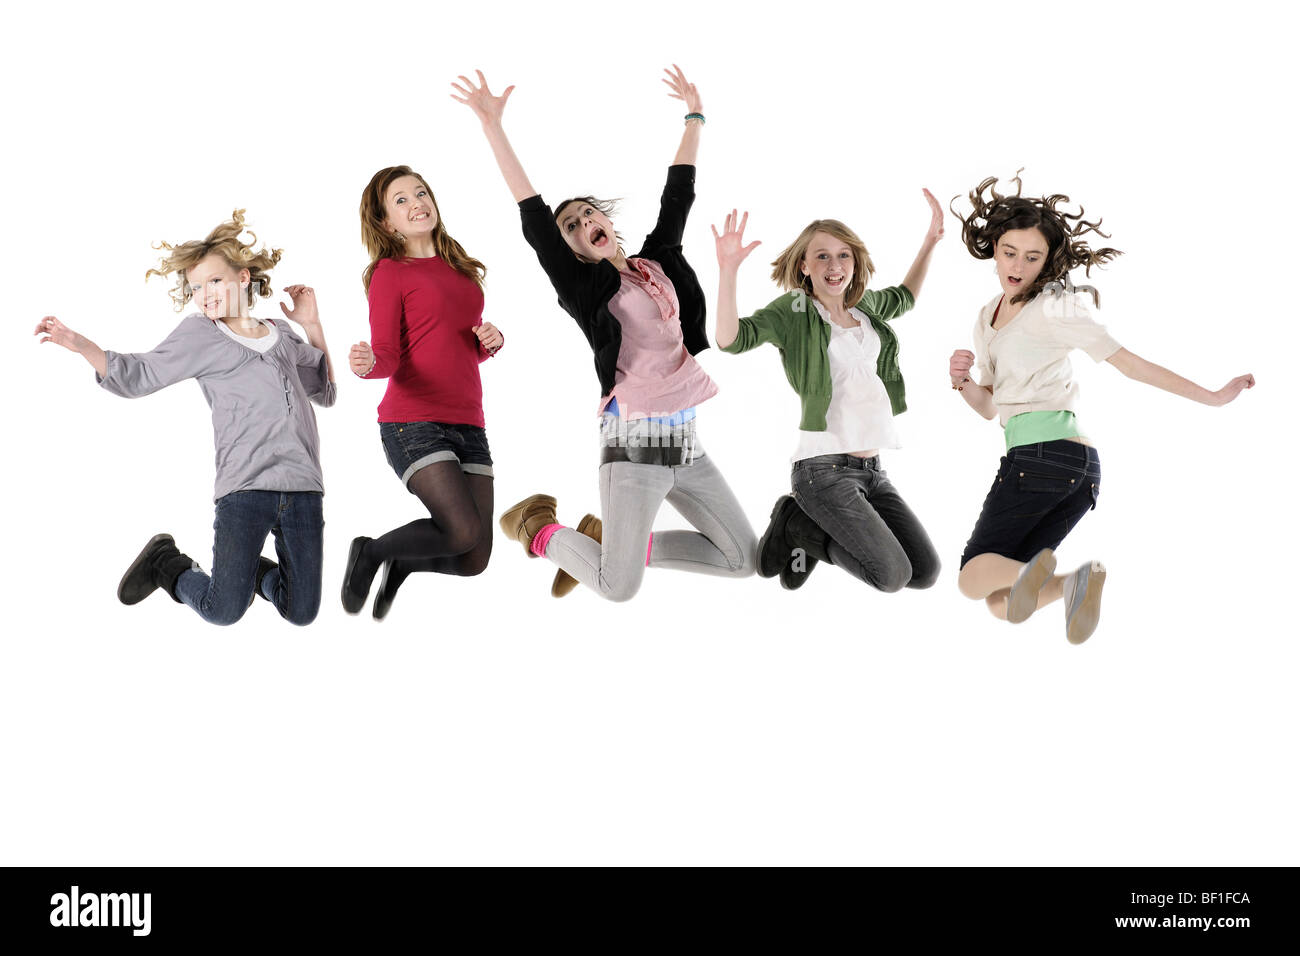 Five teenage girls jumping in the air against white background Stock Photo